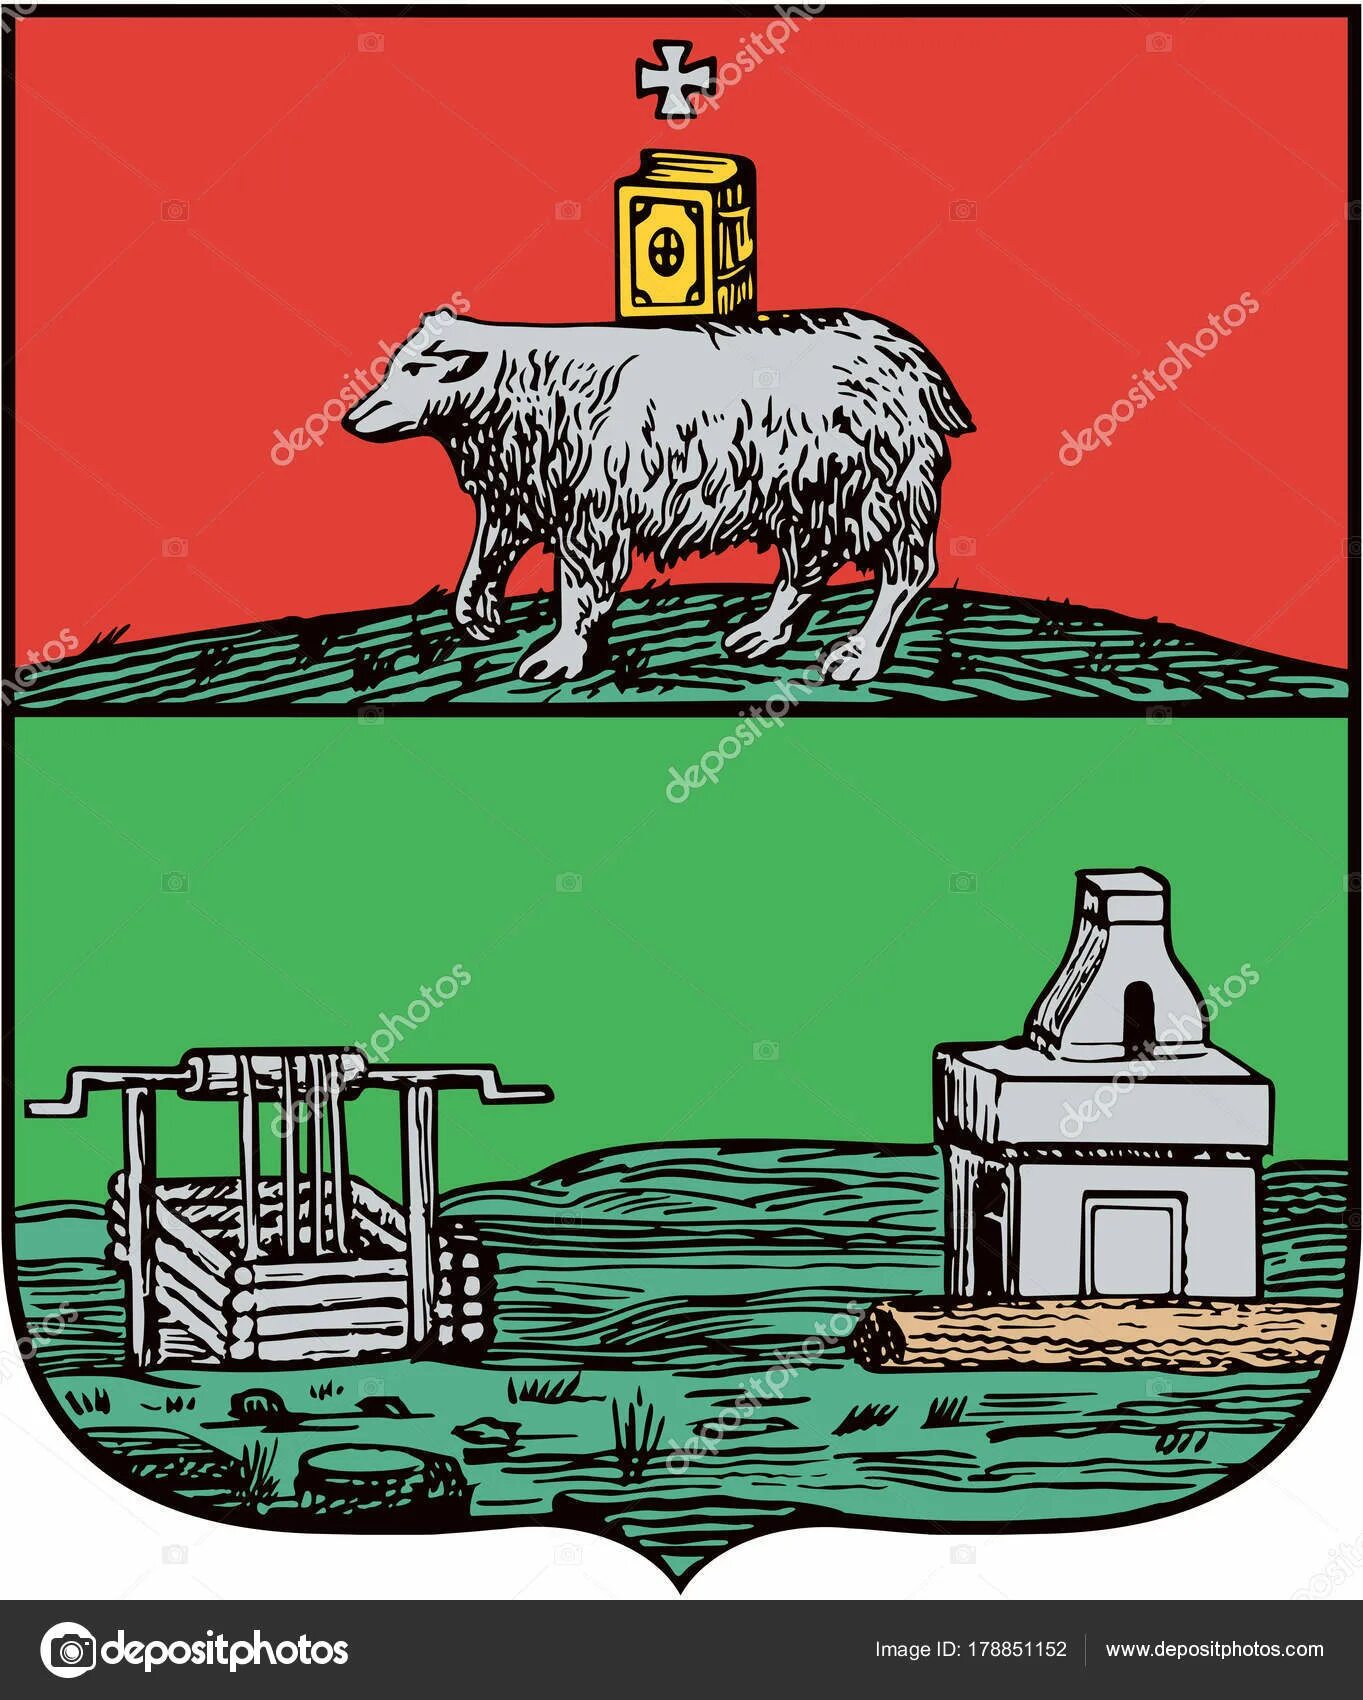 Coat of arms of Yekaterinburg #10